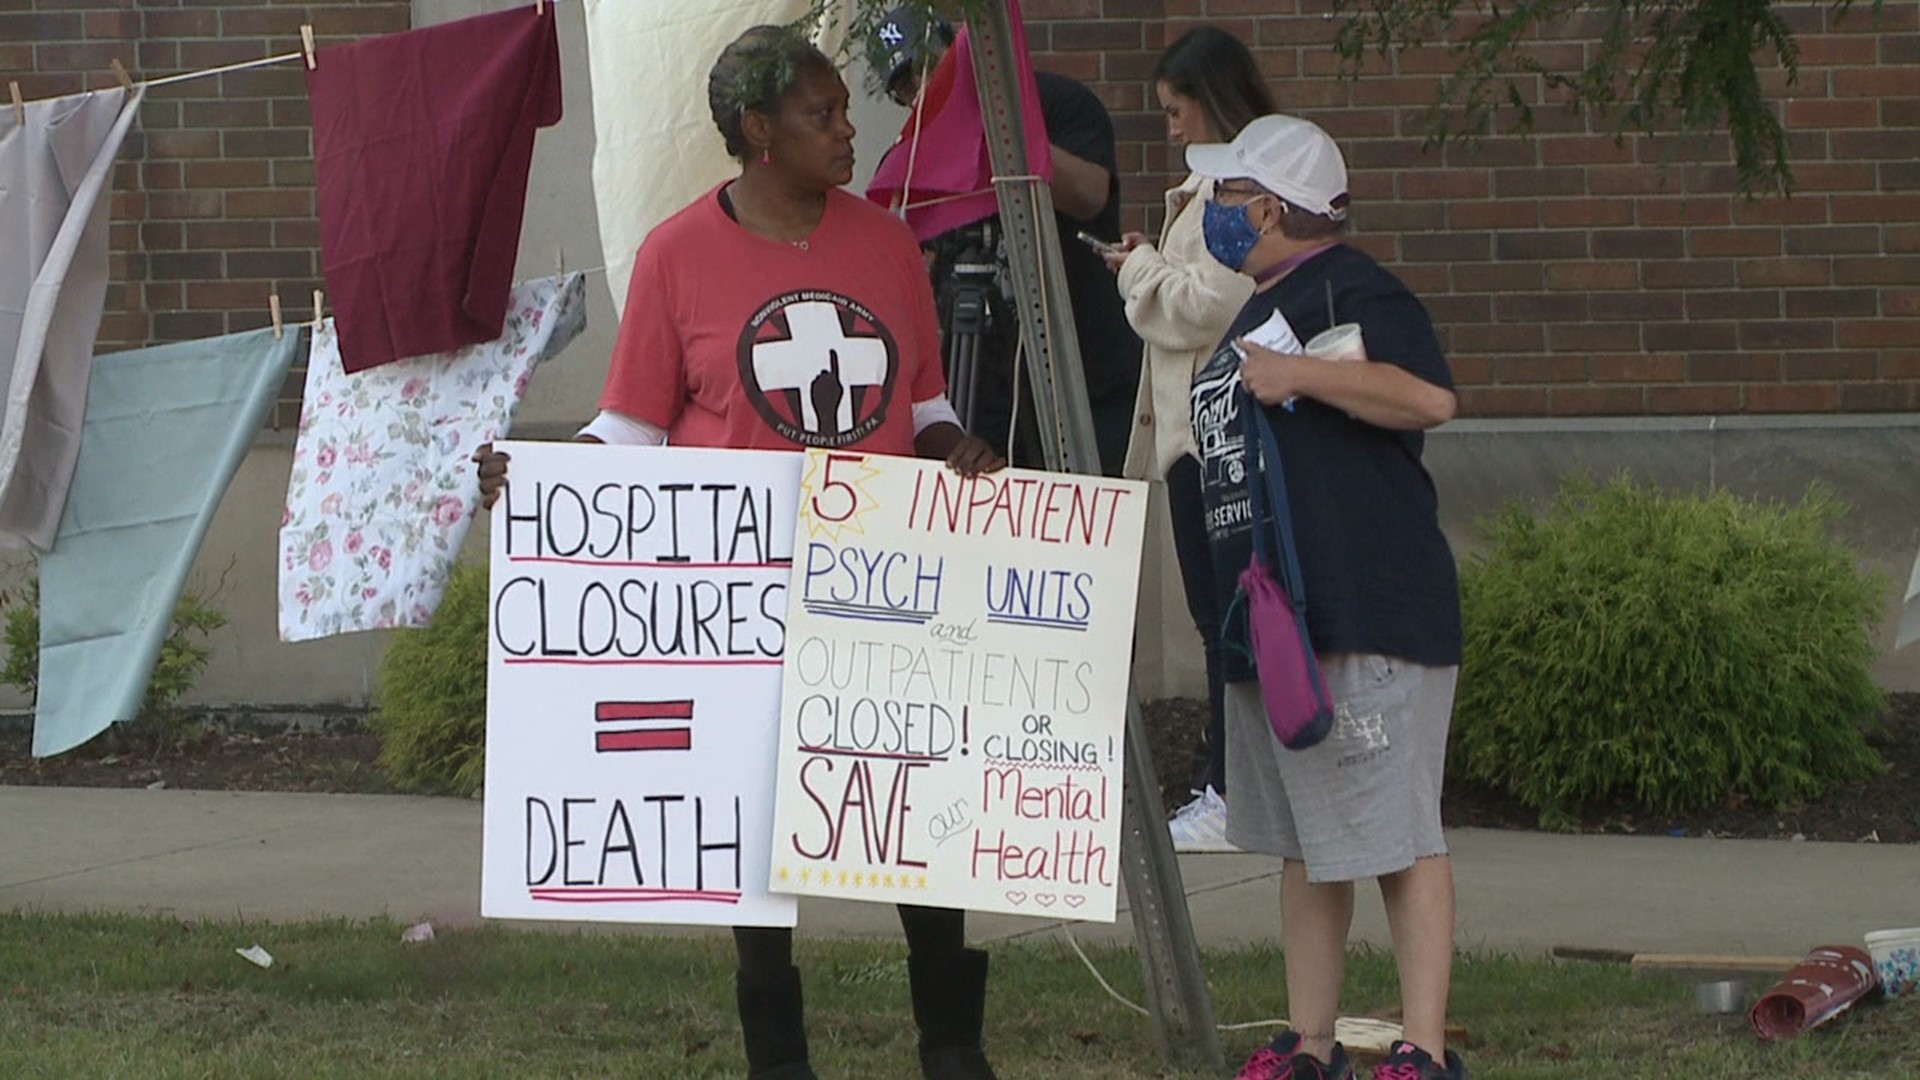 Protestors showed up not just to represent the patients and workers at First Hospital but also the other healthcare facilities being closed around the region.